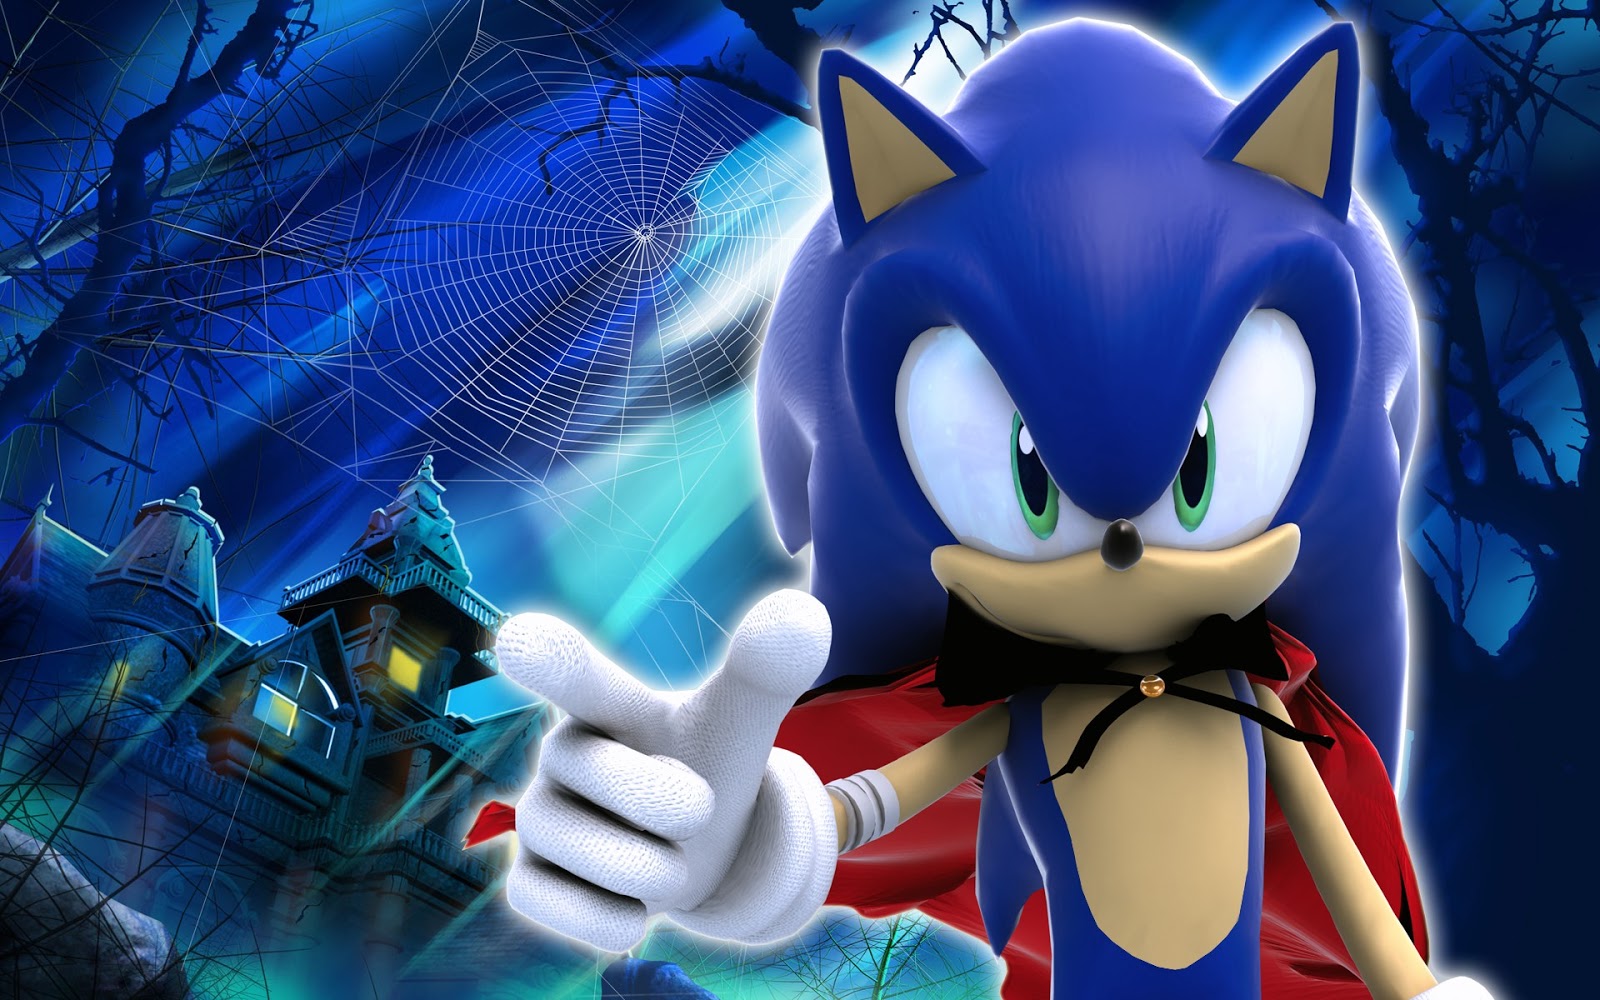 had collect 11 best Sonic the Hedgehog HD wallpapers for you